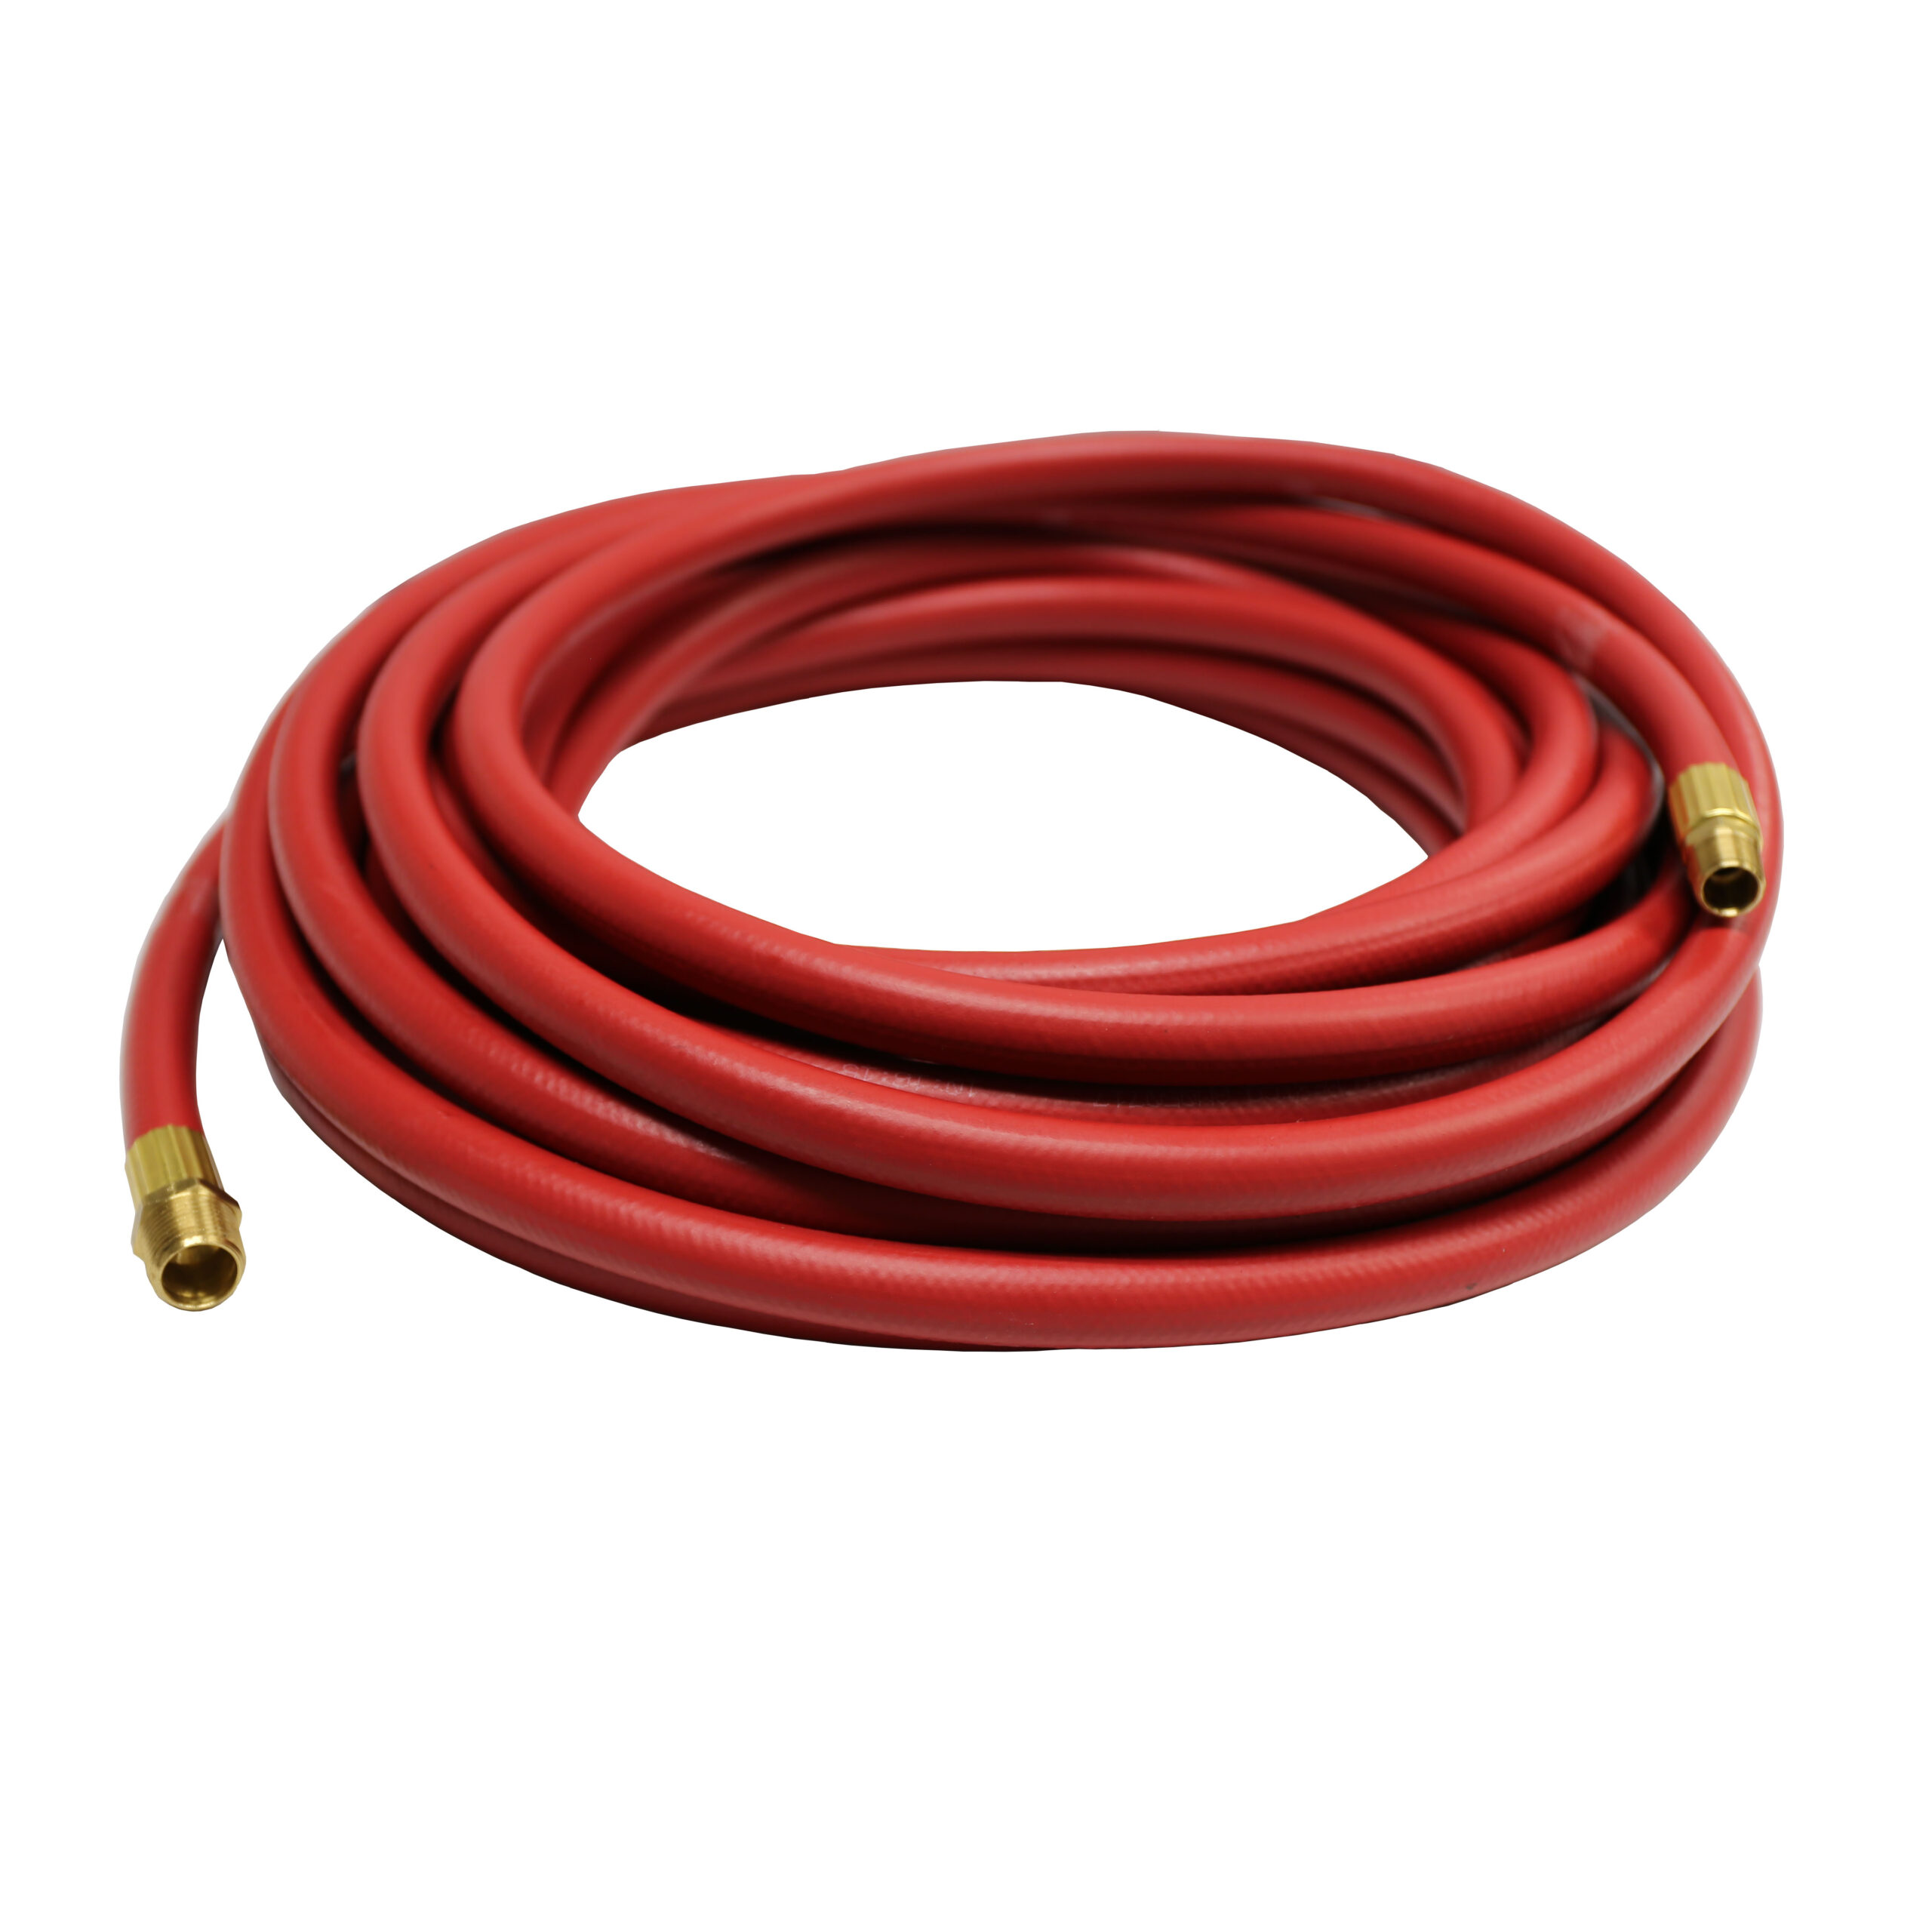 Reelcraft 601146-75 - 3/4 in. x 75 ft. Low Pressure Rubber Air Hose